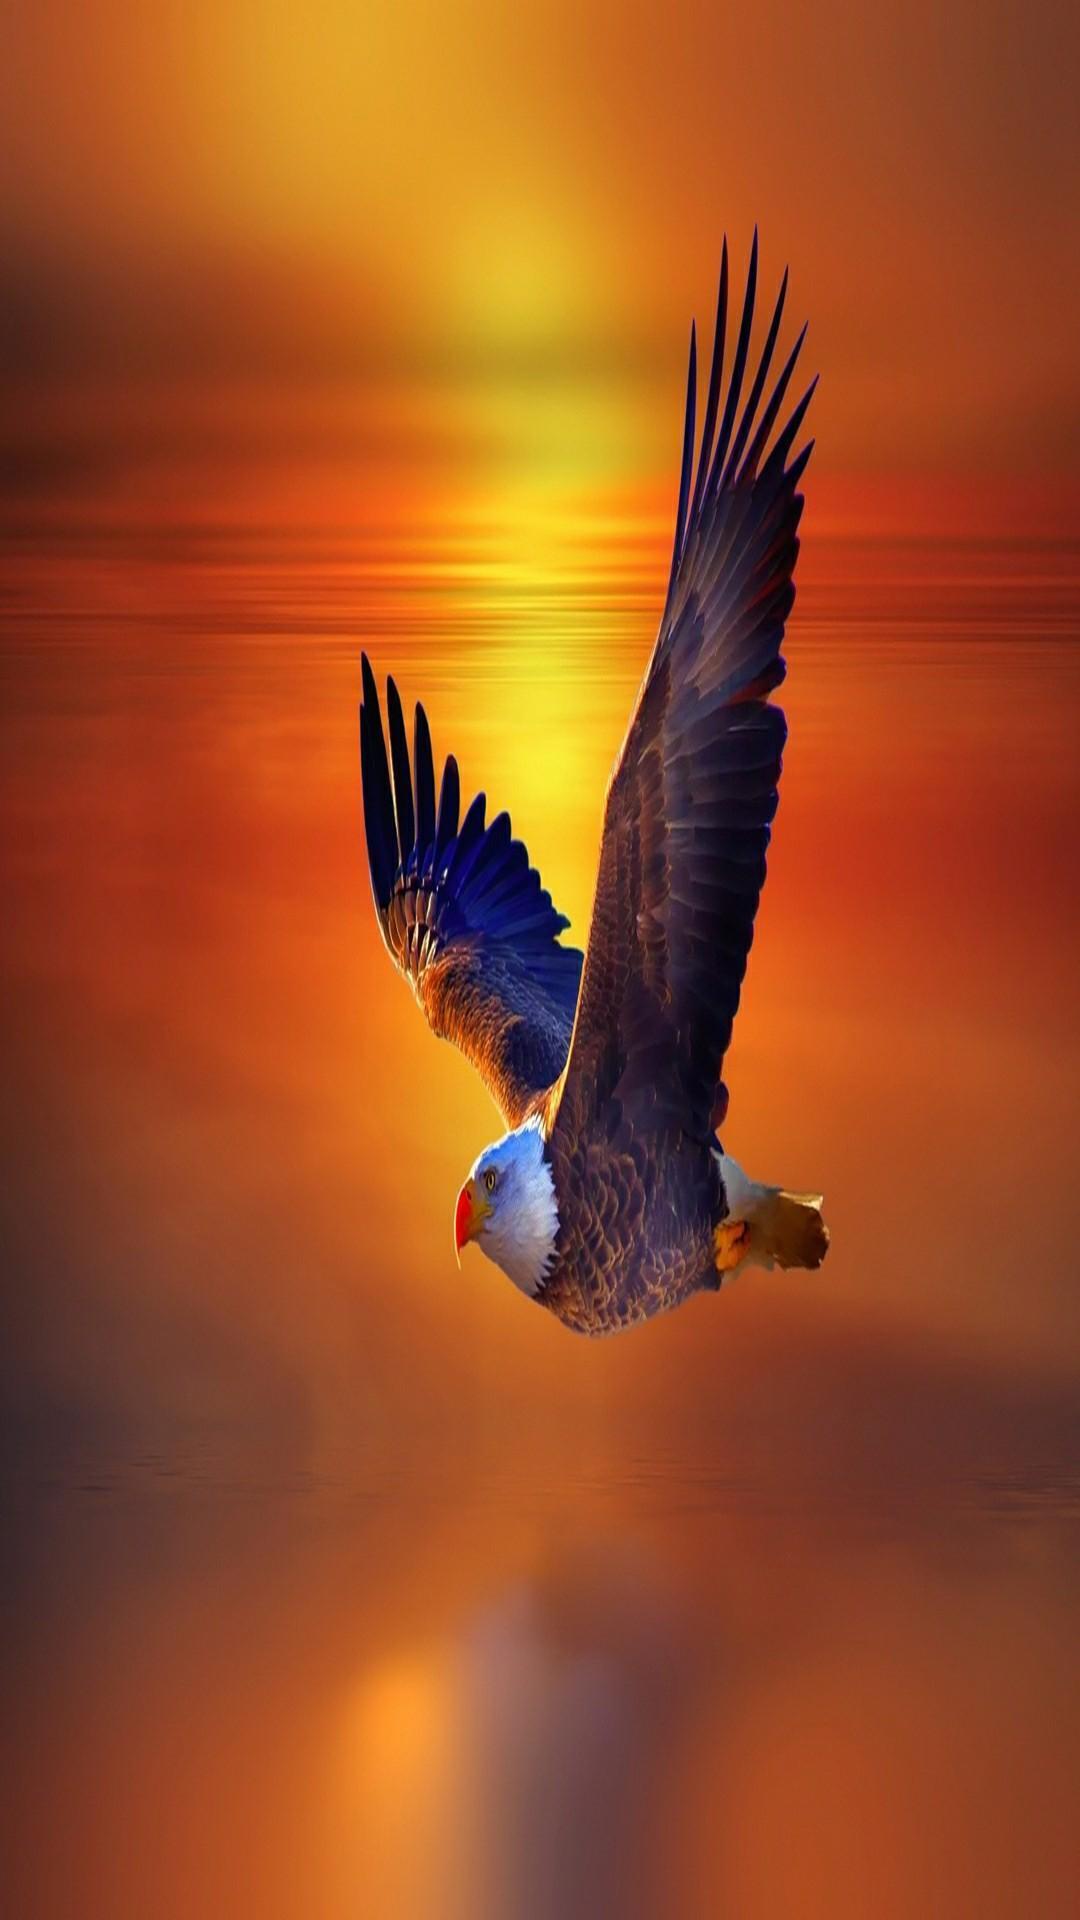 Eagle Sunset Wallpapers - Top Free Eagle Sunset Backgrounds ...